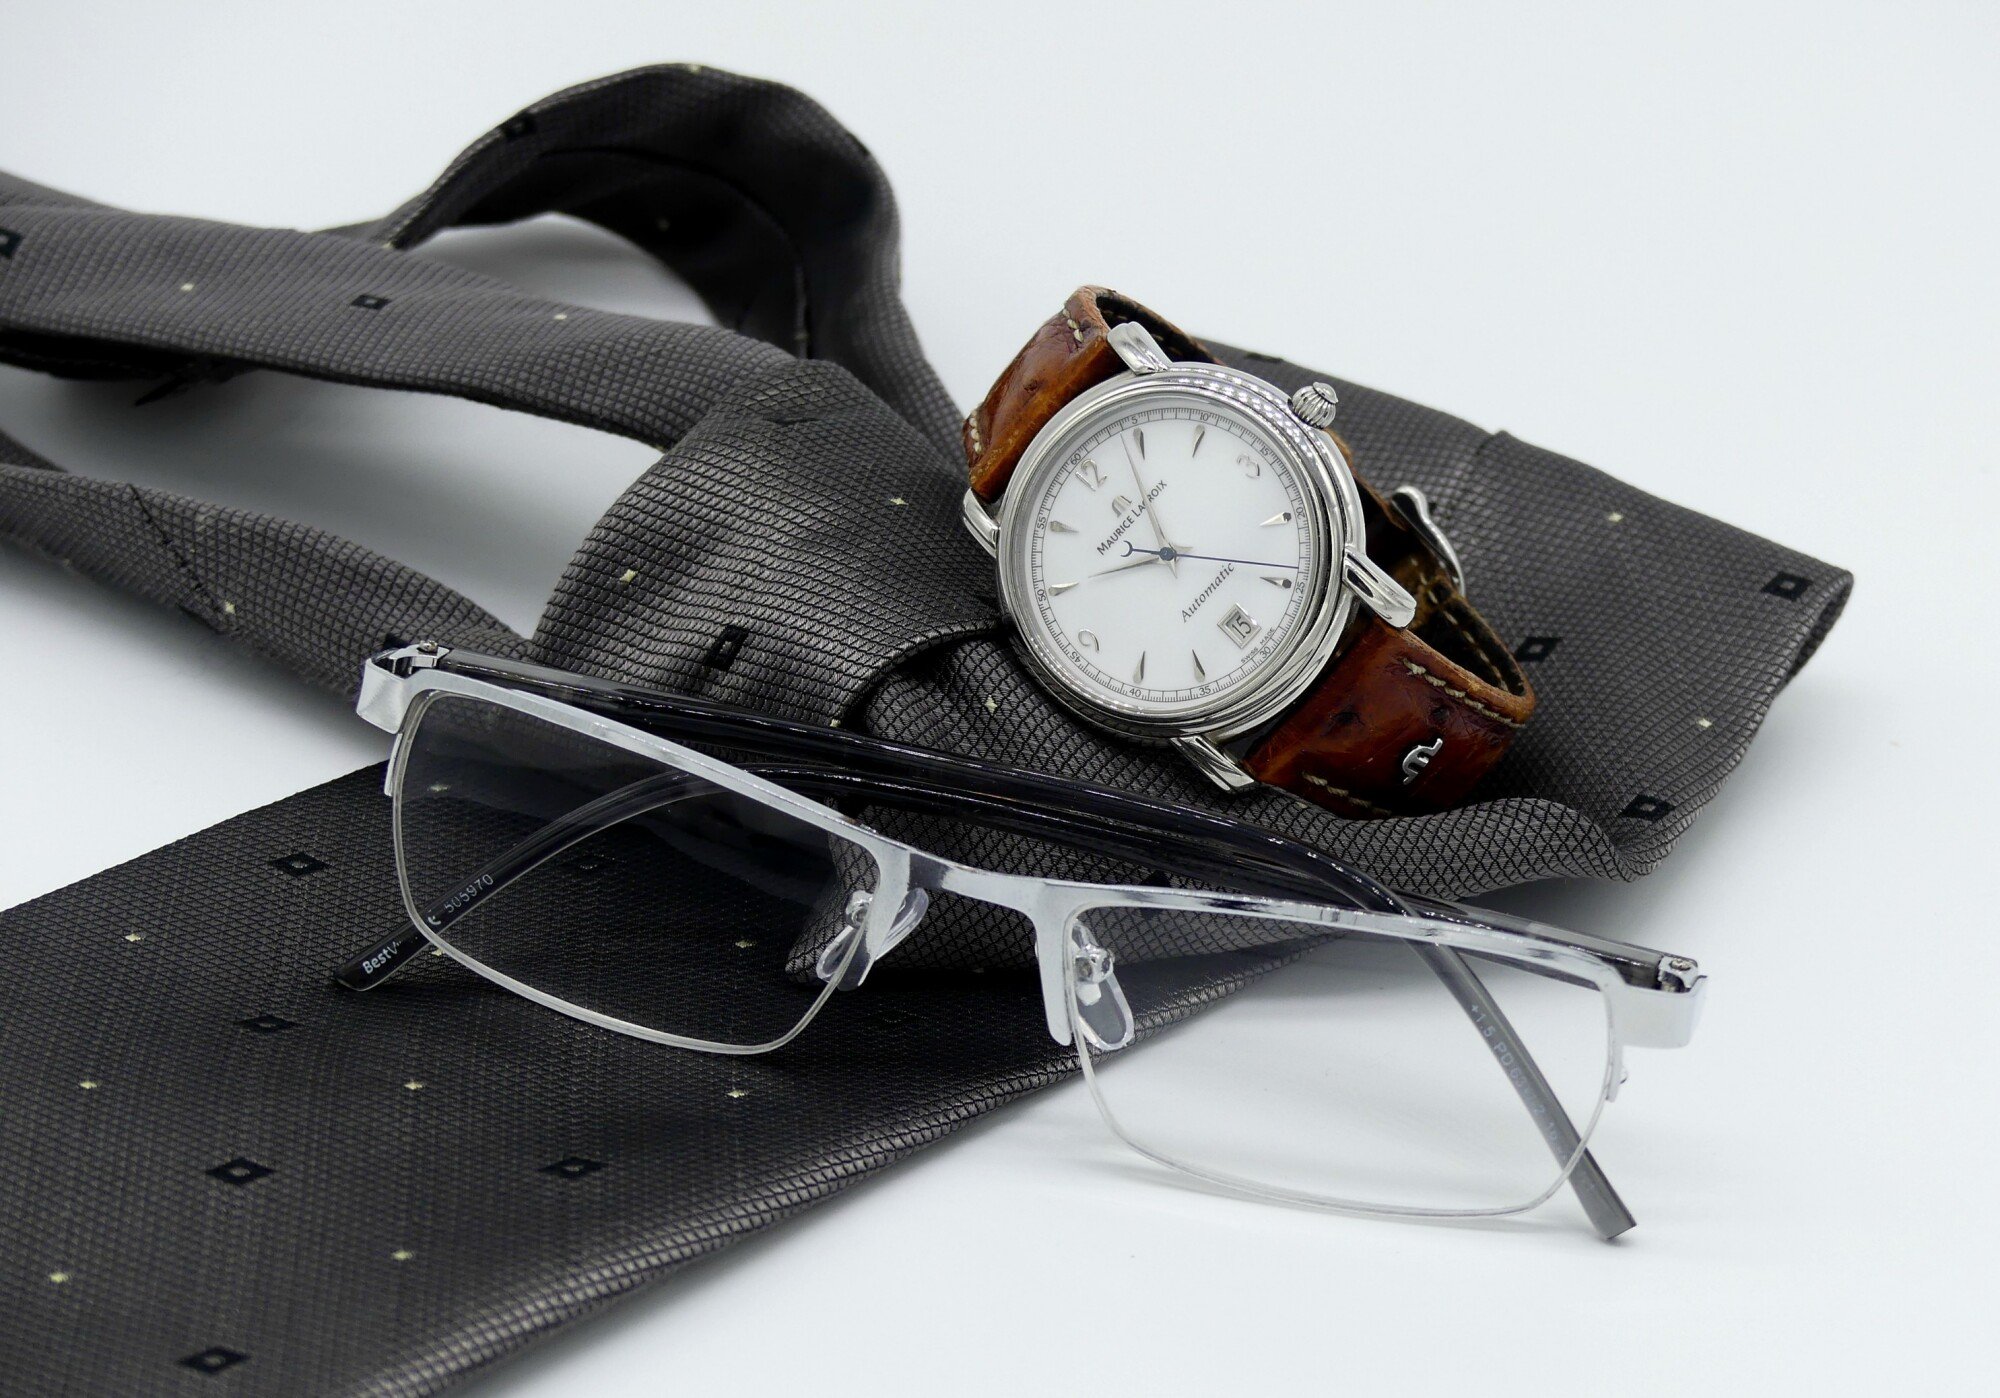 Eyeglasses beside a wrist watch together with black suit tie